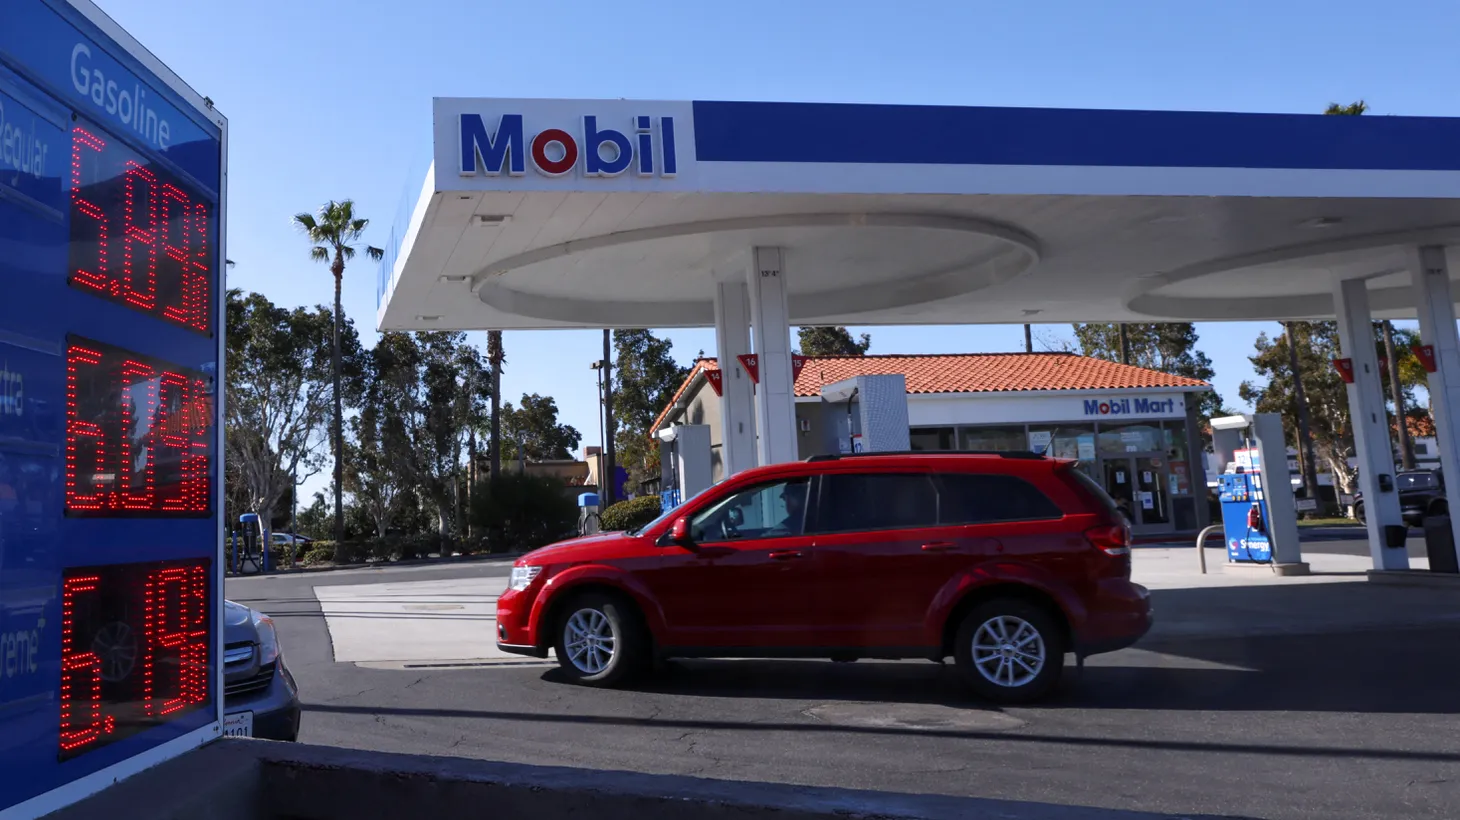 Current gas prices are shown as they continue to rise in Carlsbad, California, U.S., March 7, 2022.